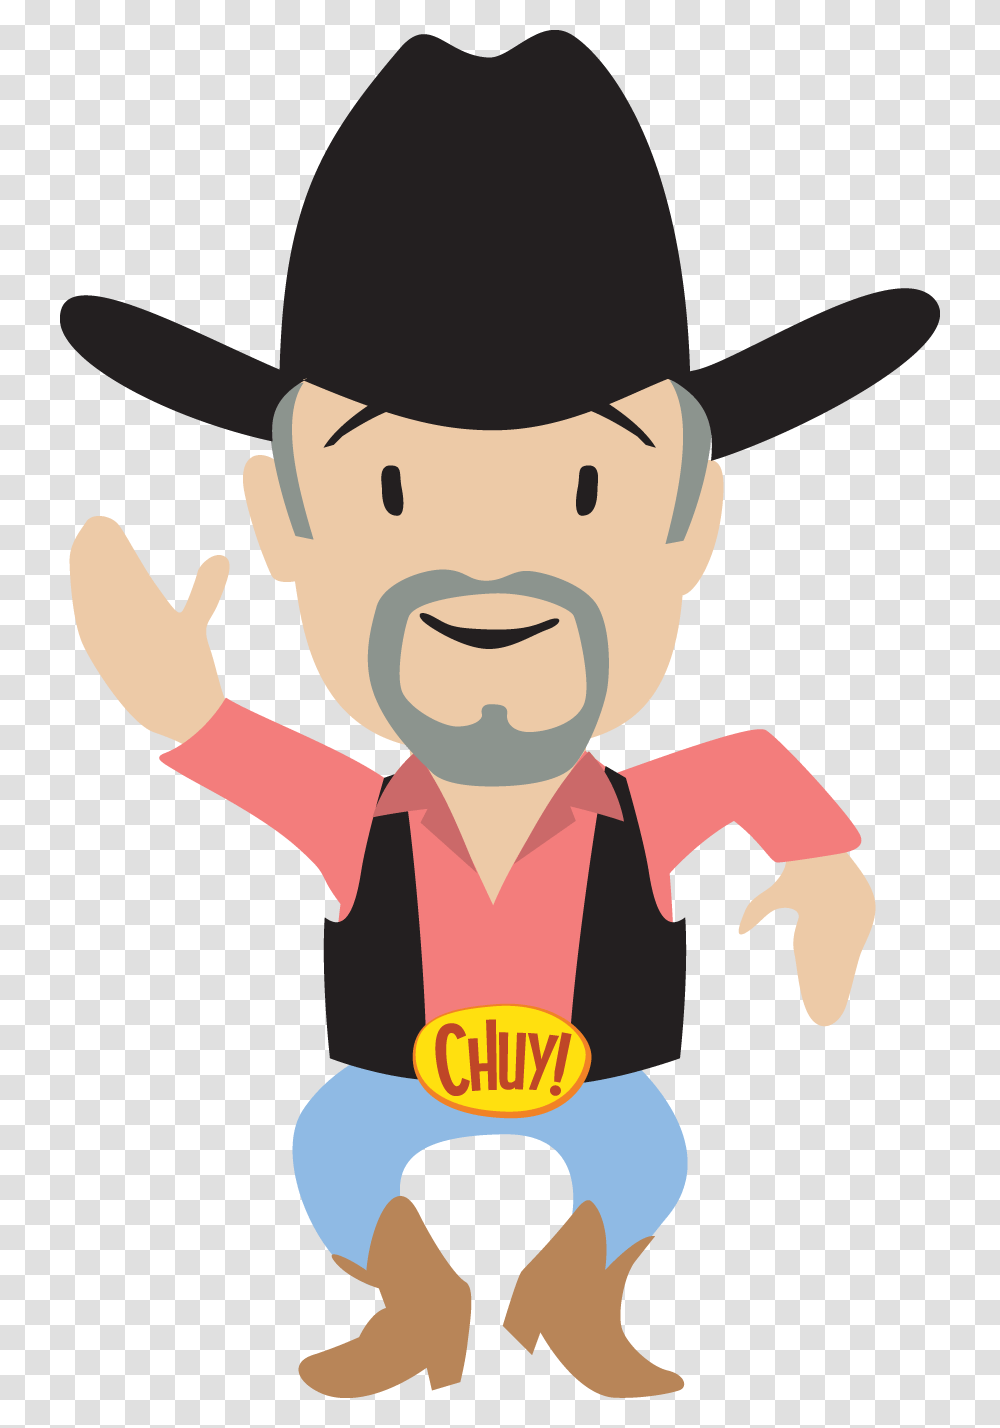 Chuy Salmon Shirt And Black Hat Shirt, Person, Face, Poster Transparent Png